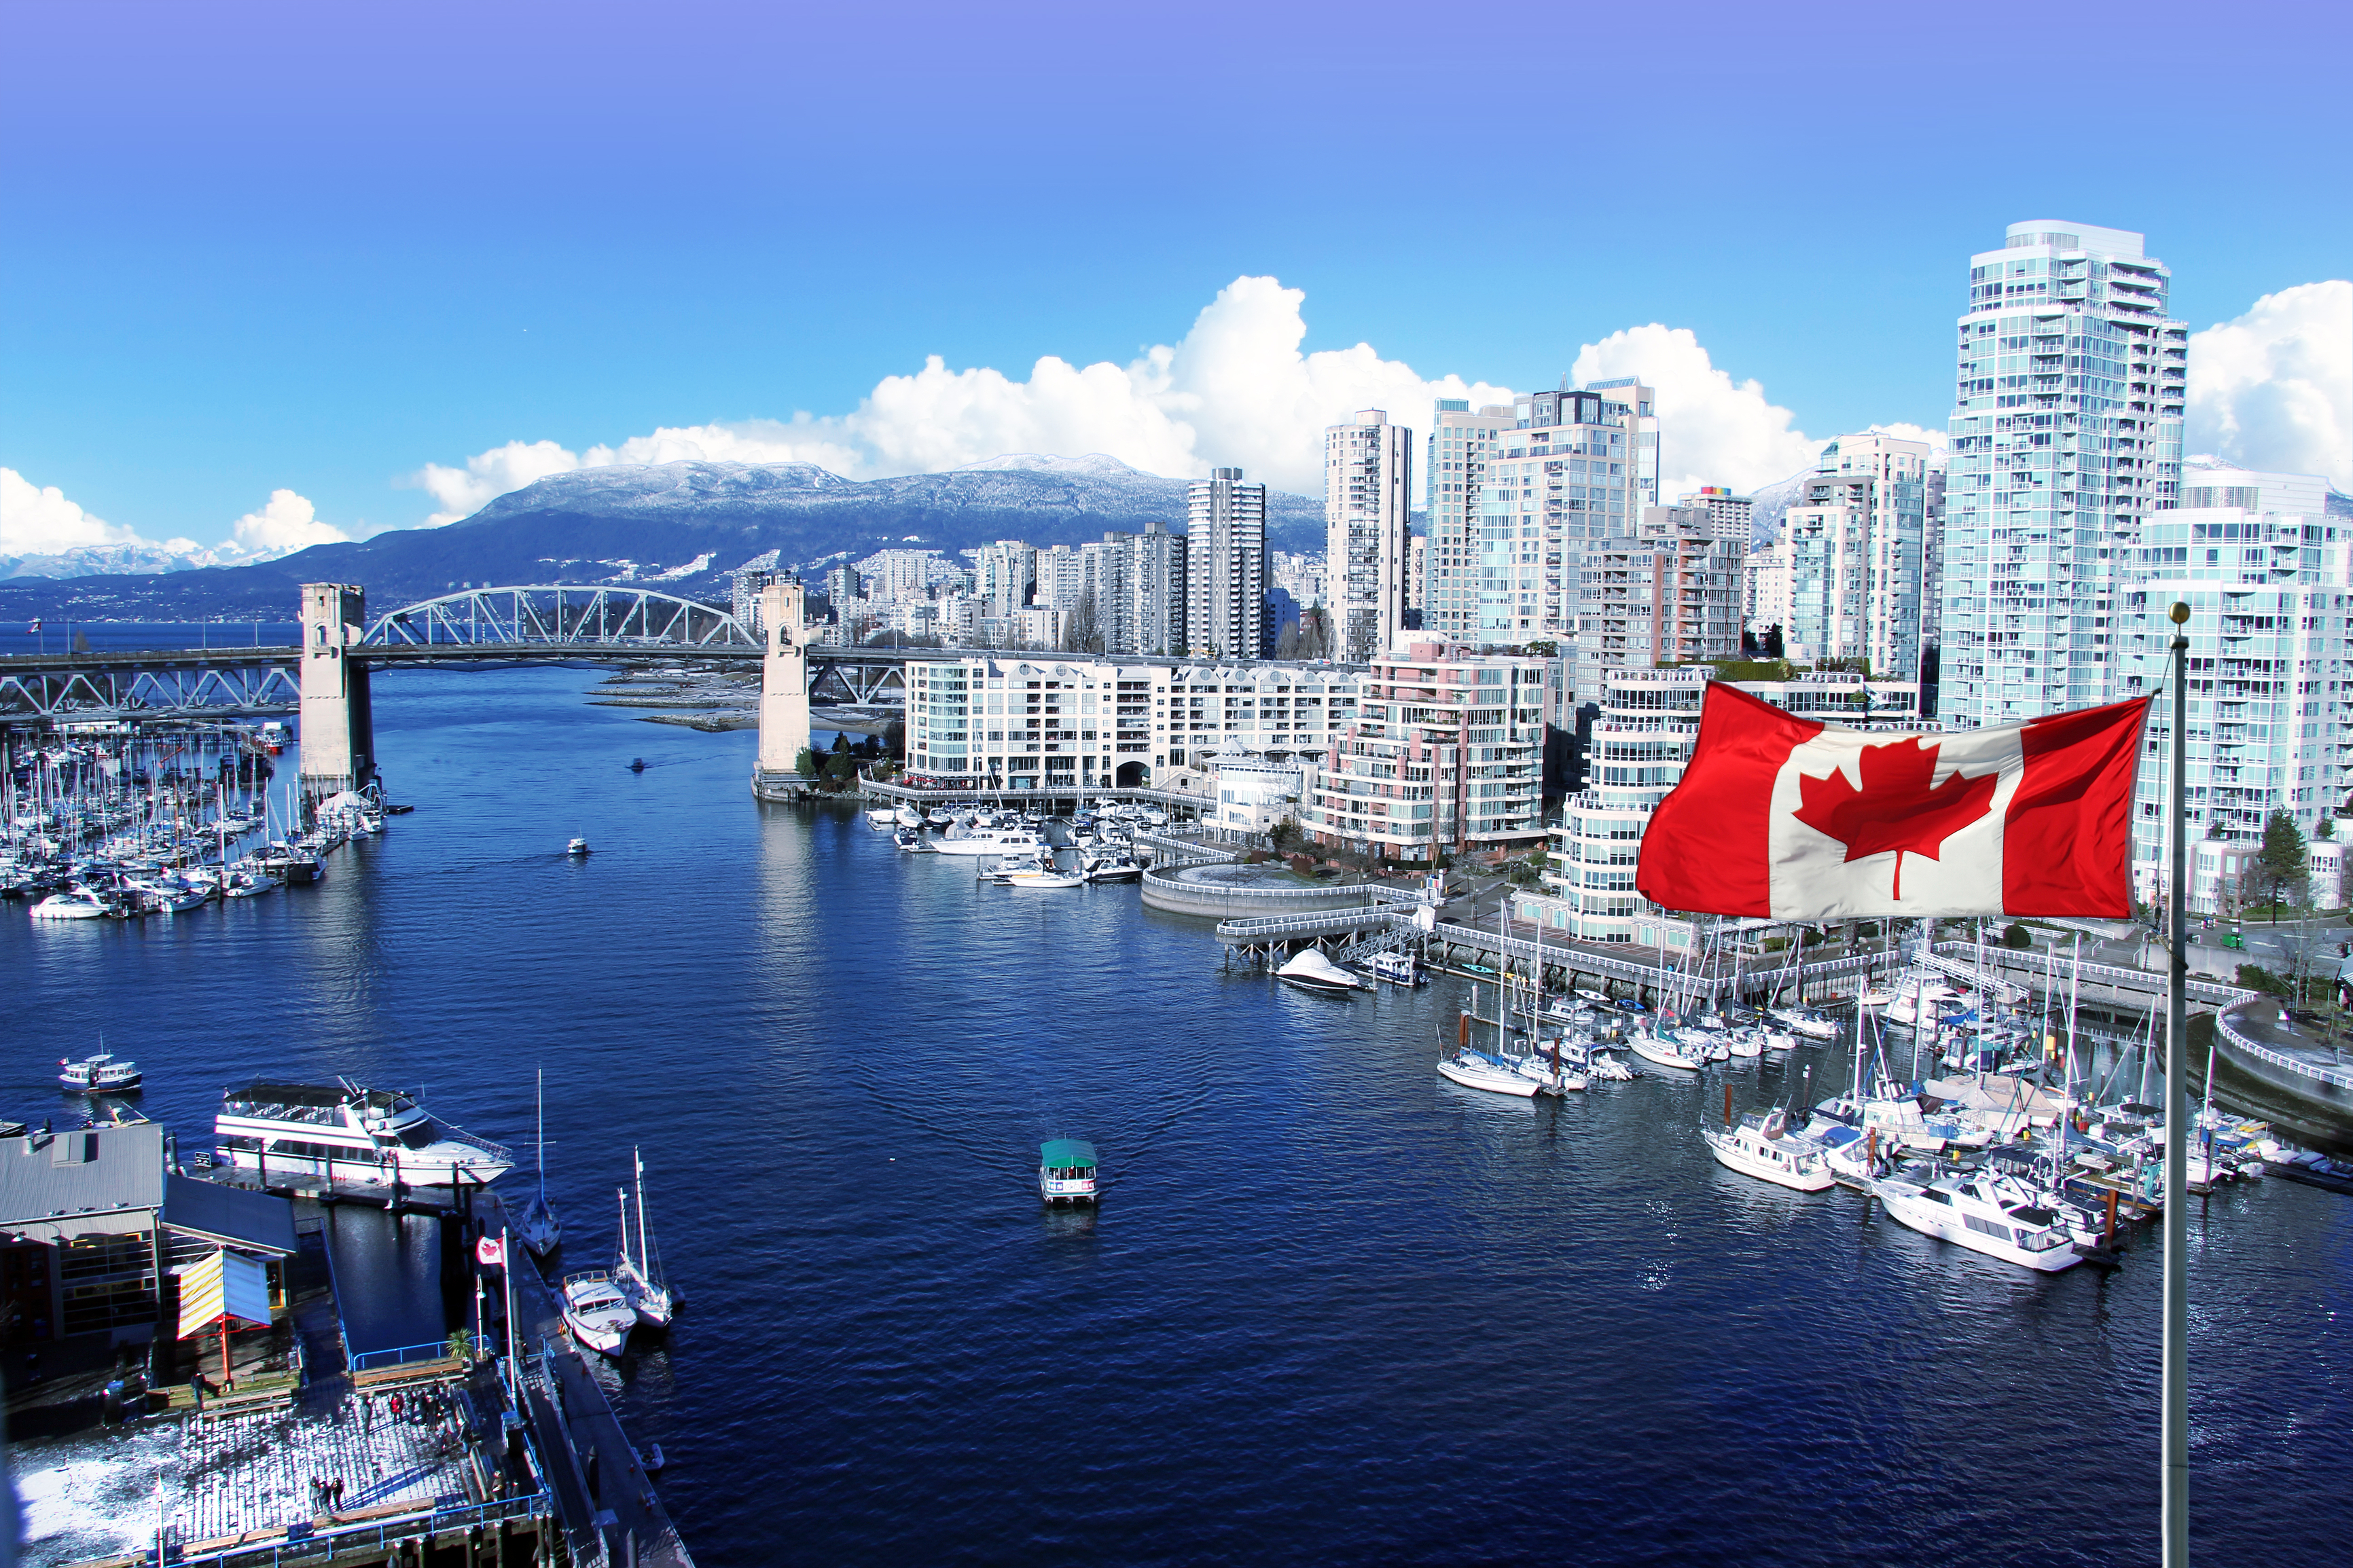 Flights to Western Canada in the $100s and $200s round-trip